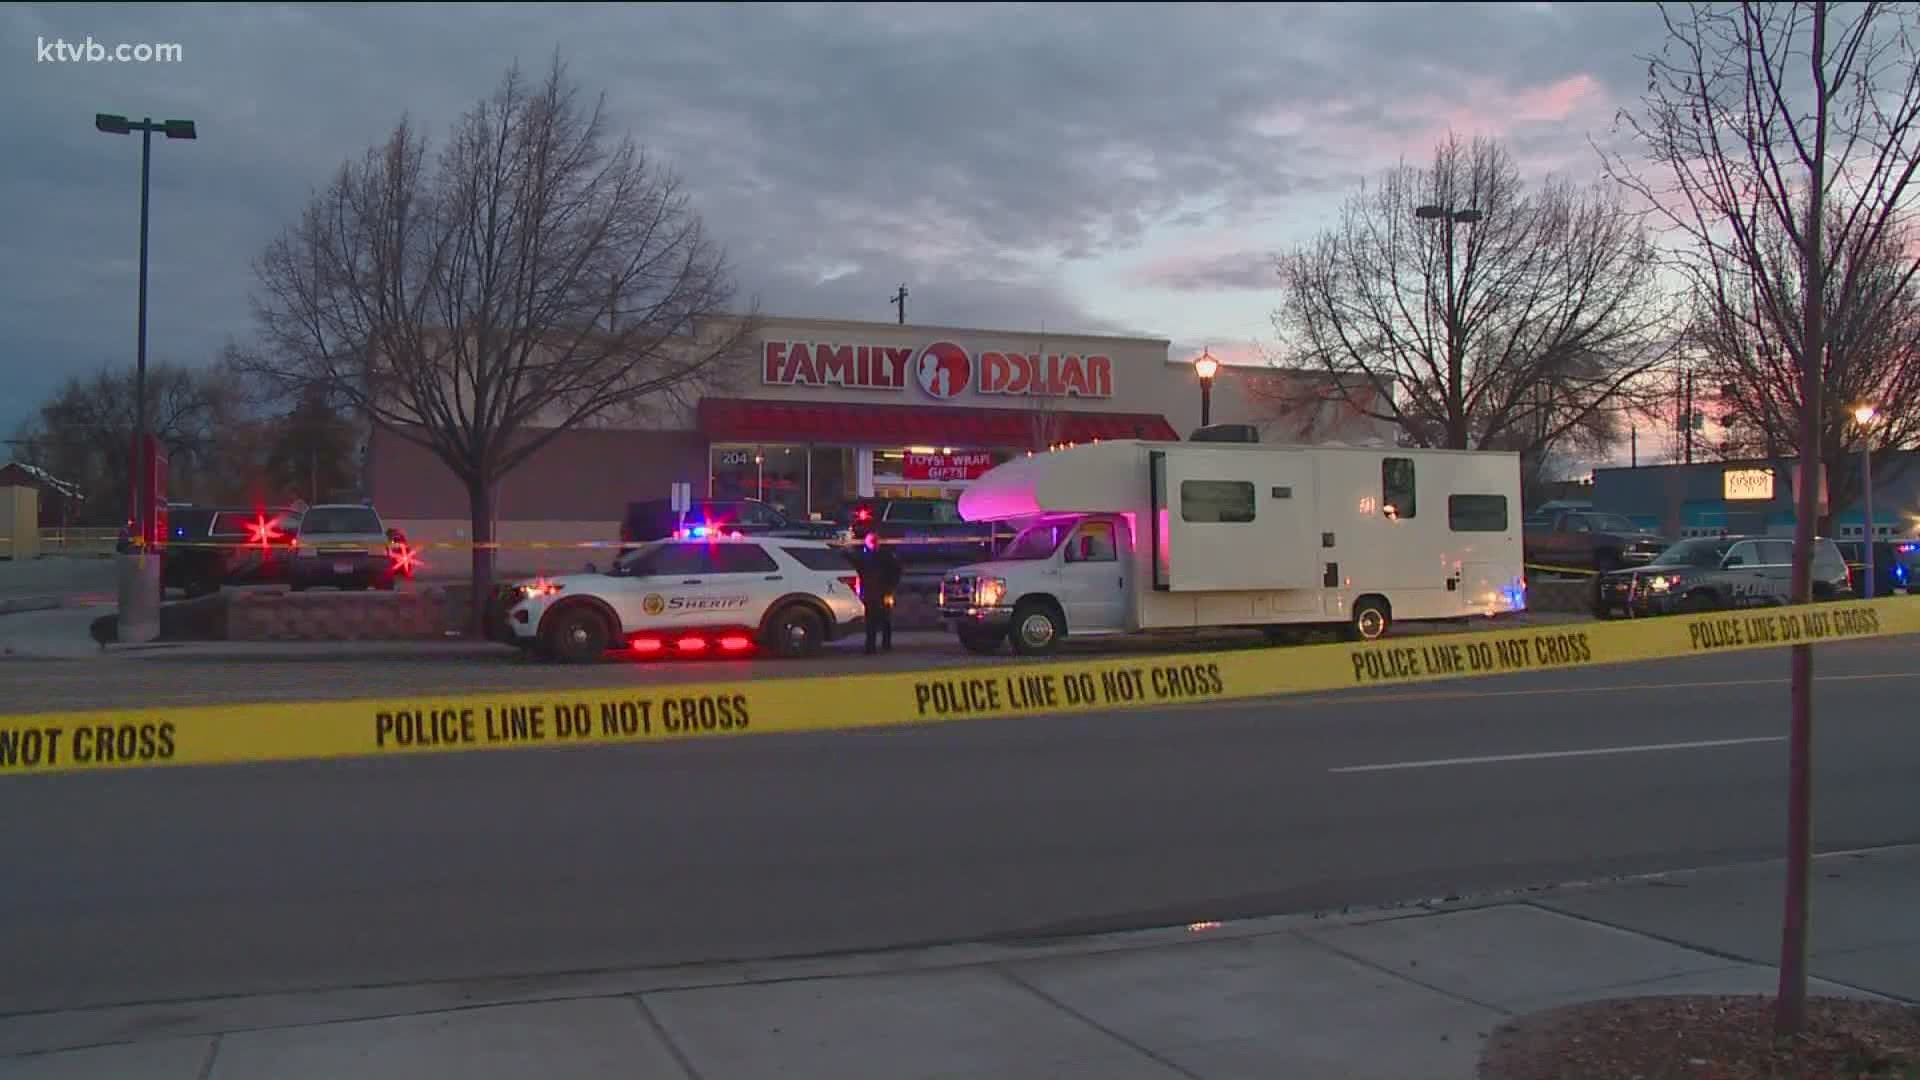 The incident left one man dead and sent a Nampa Police officer to the hospital with a stab wound to his face, according to the Nampa Police Department.